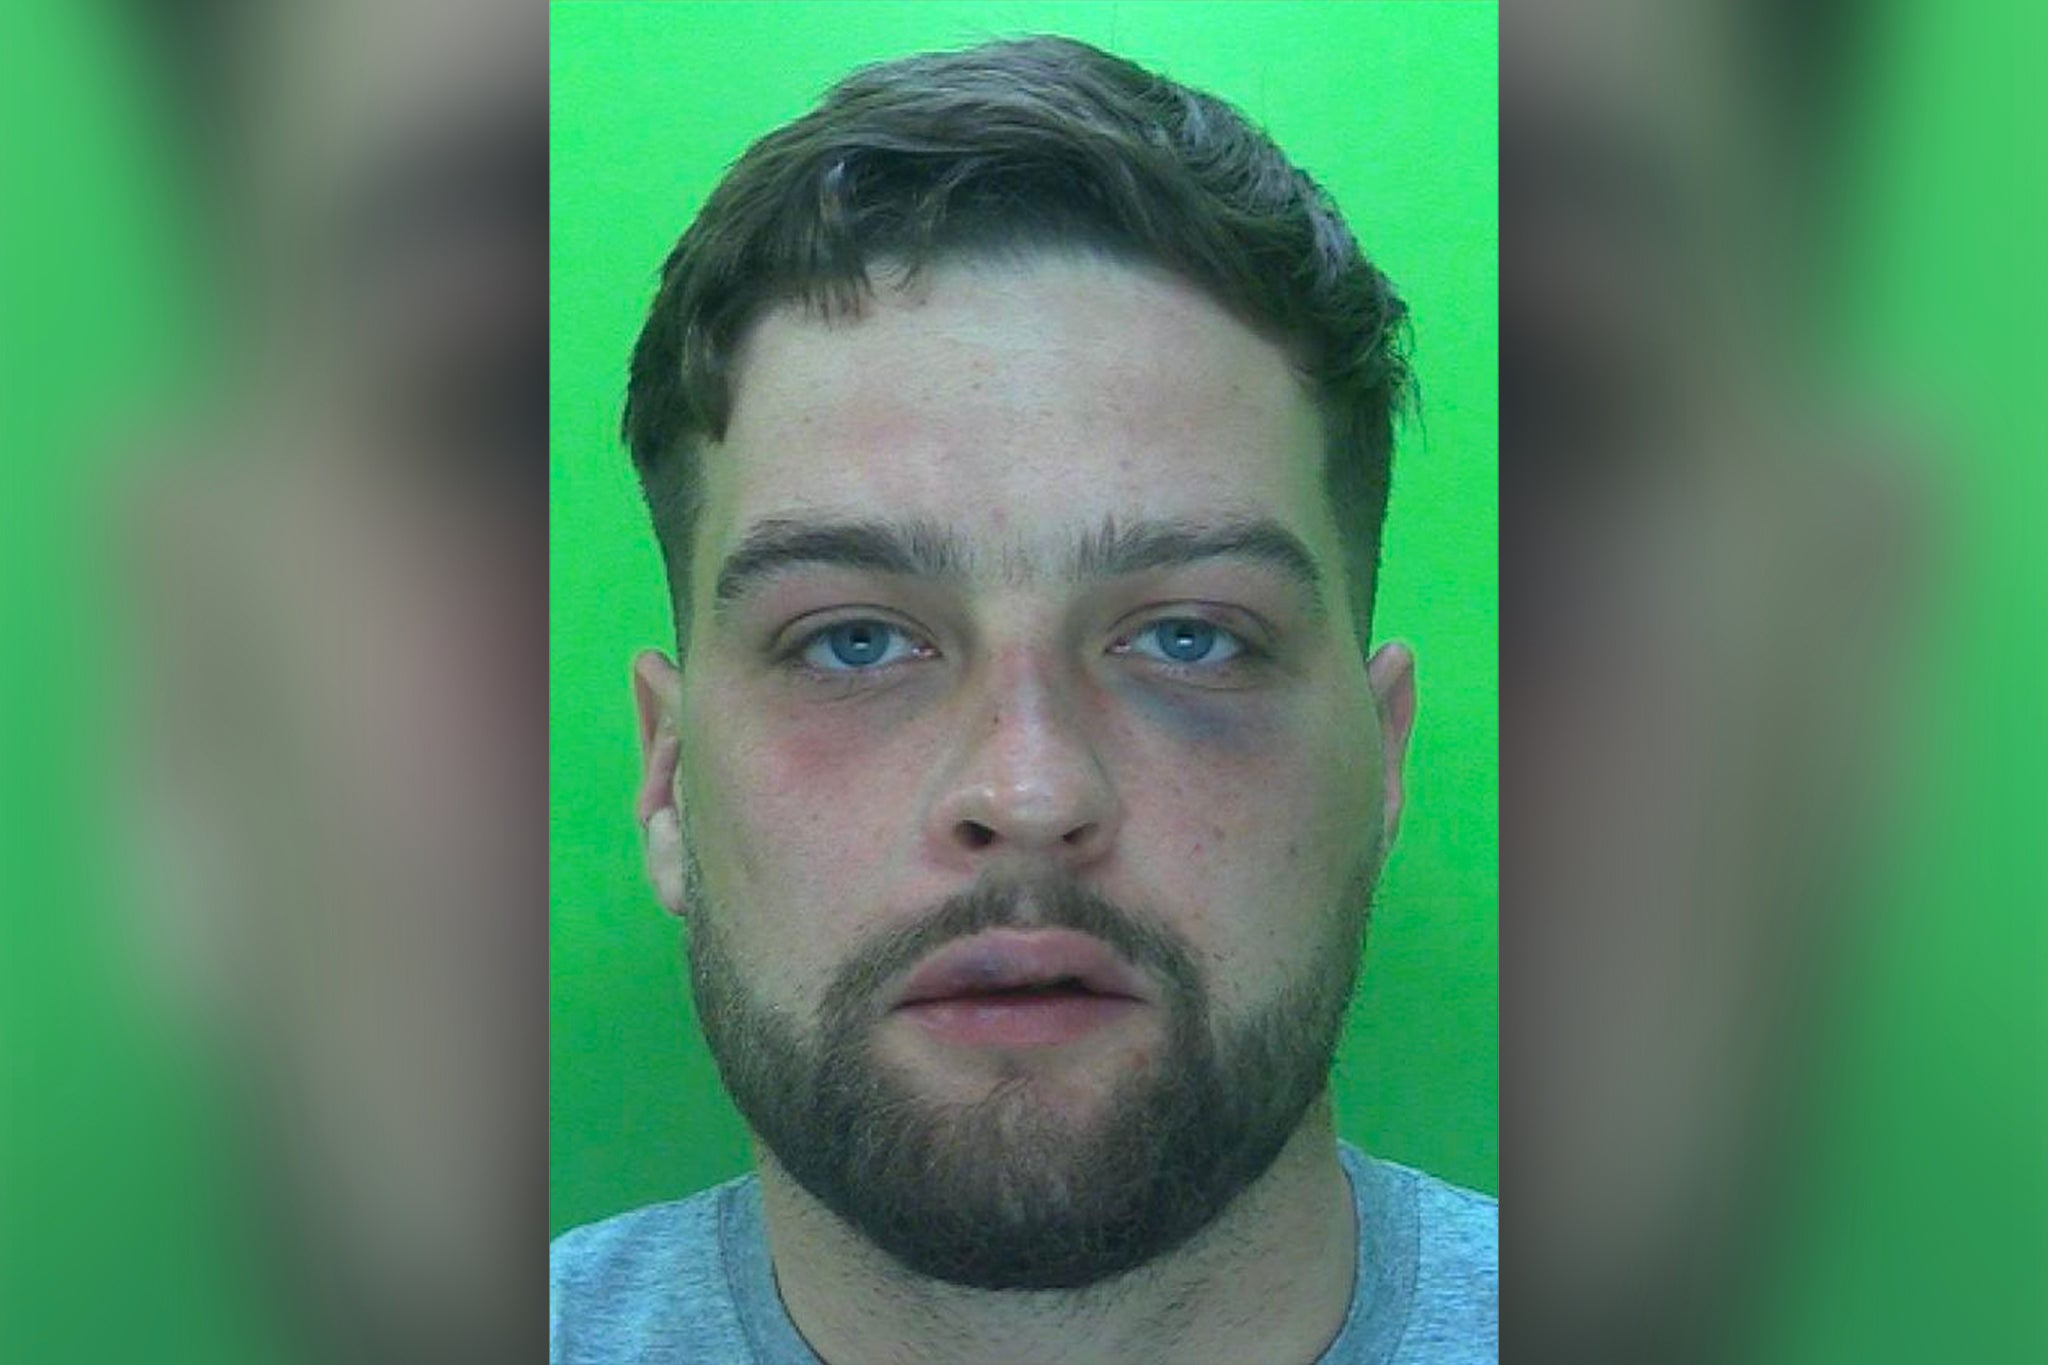 Caden Crossley has been jailed for 12 years for the ‘despicable’ attack